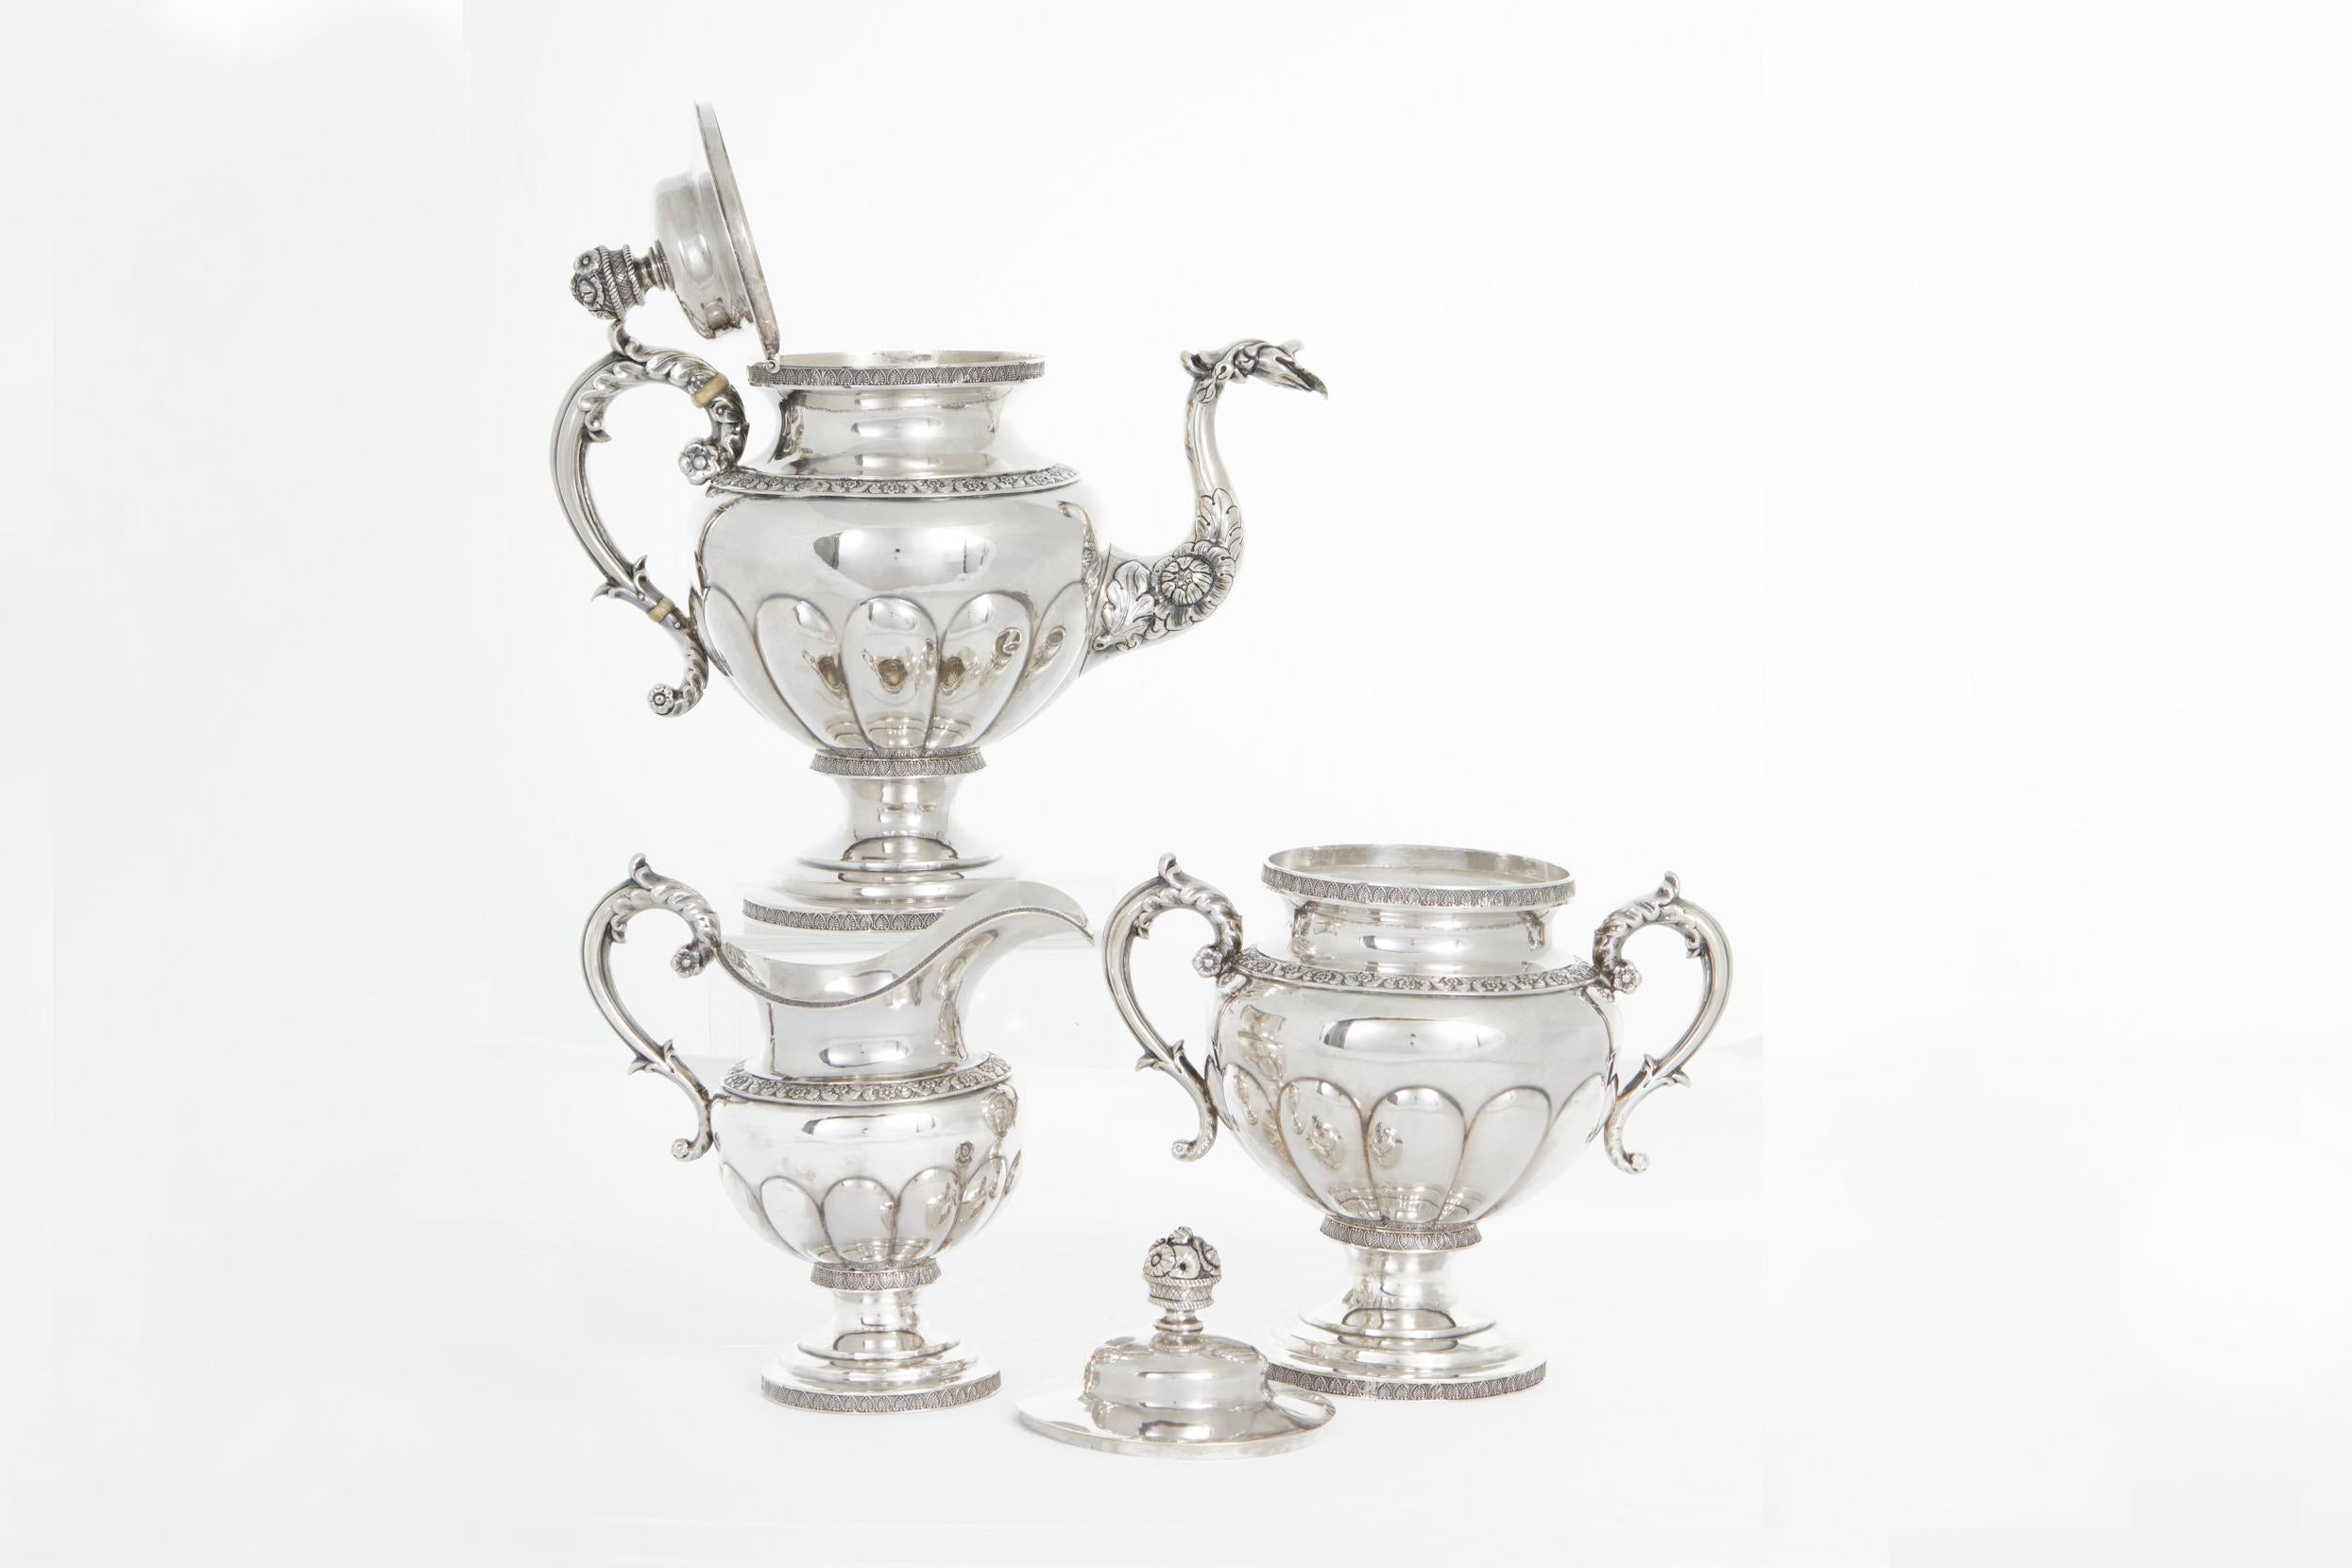 North American 19th Century Silver Hand Wrought Tea / Coffee Service For Sale